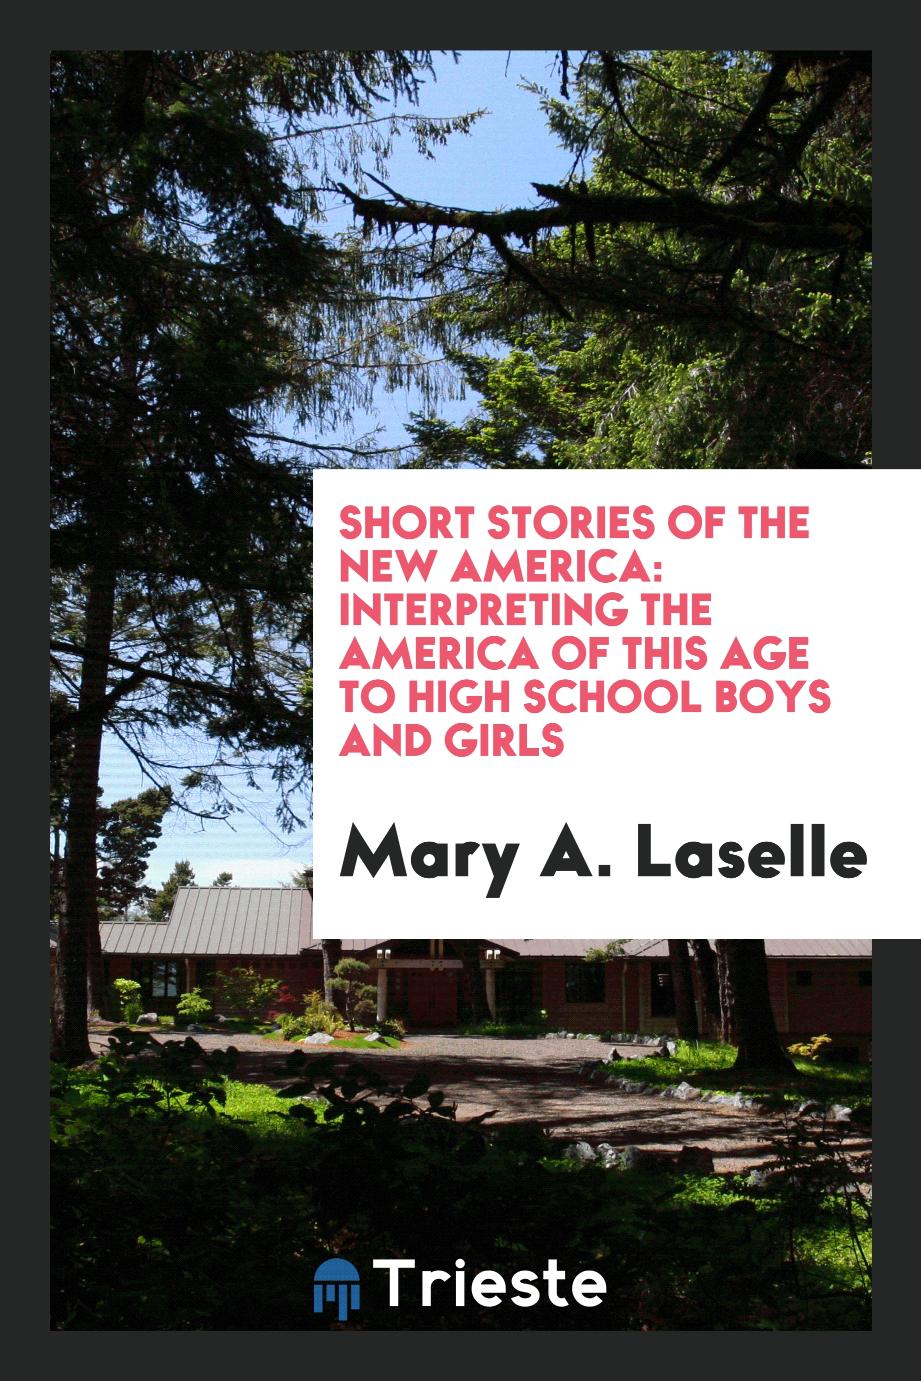 Short stories of the new America: interpreting the America of this age to high school boys and girls